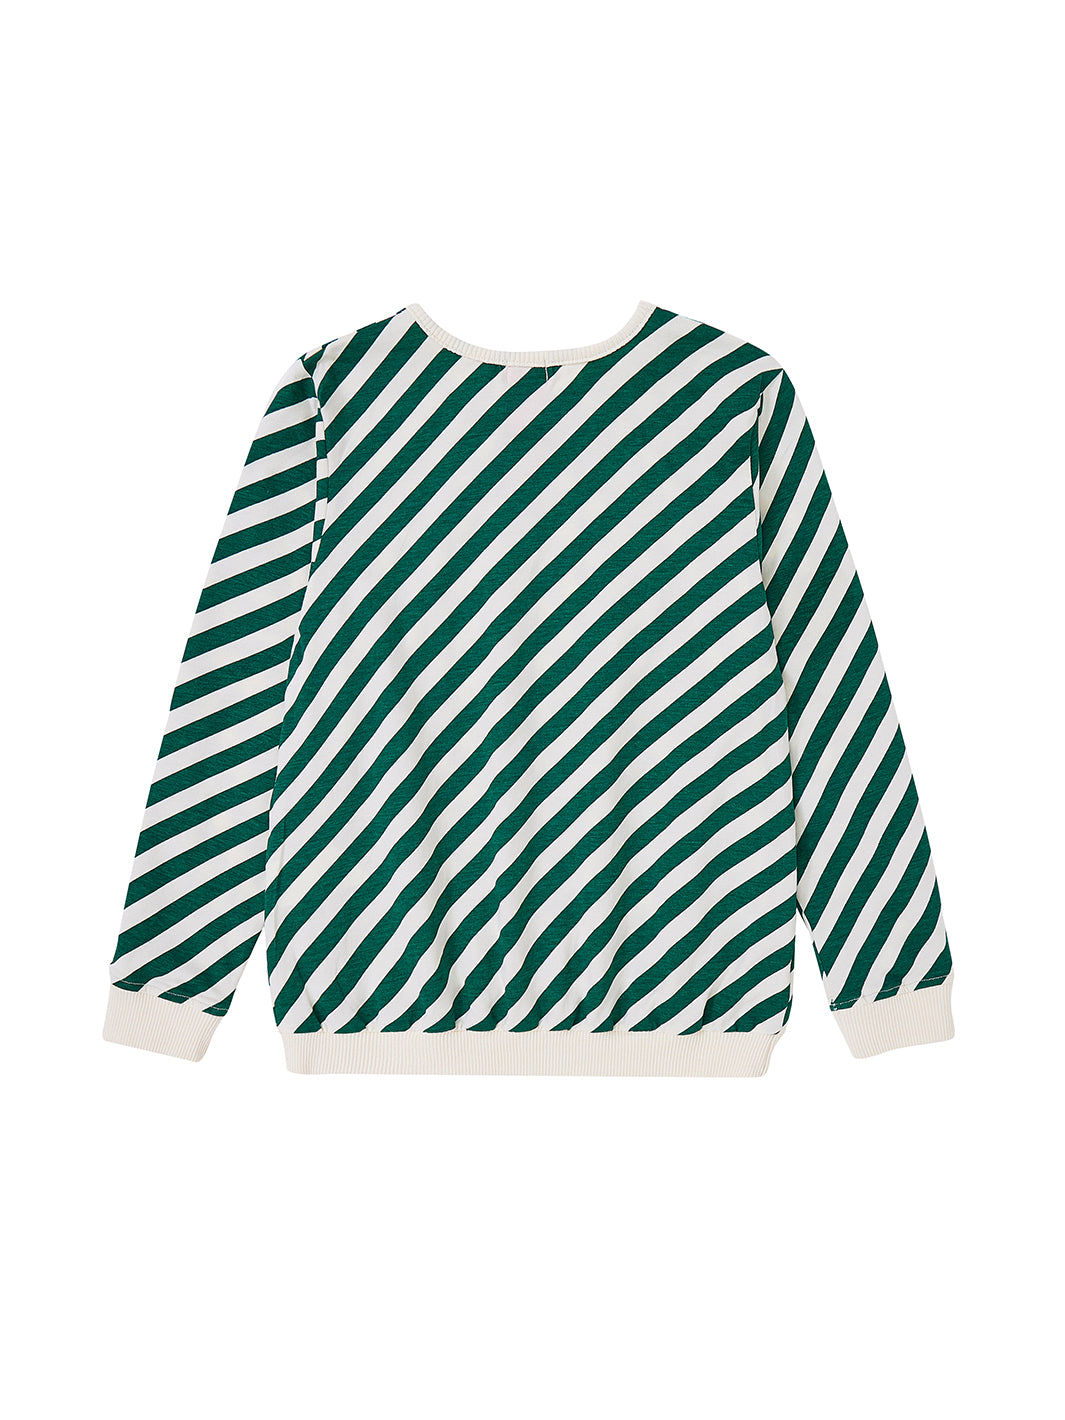 Slanted Striped Top